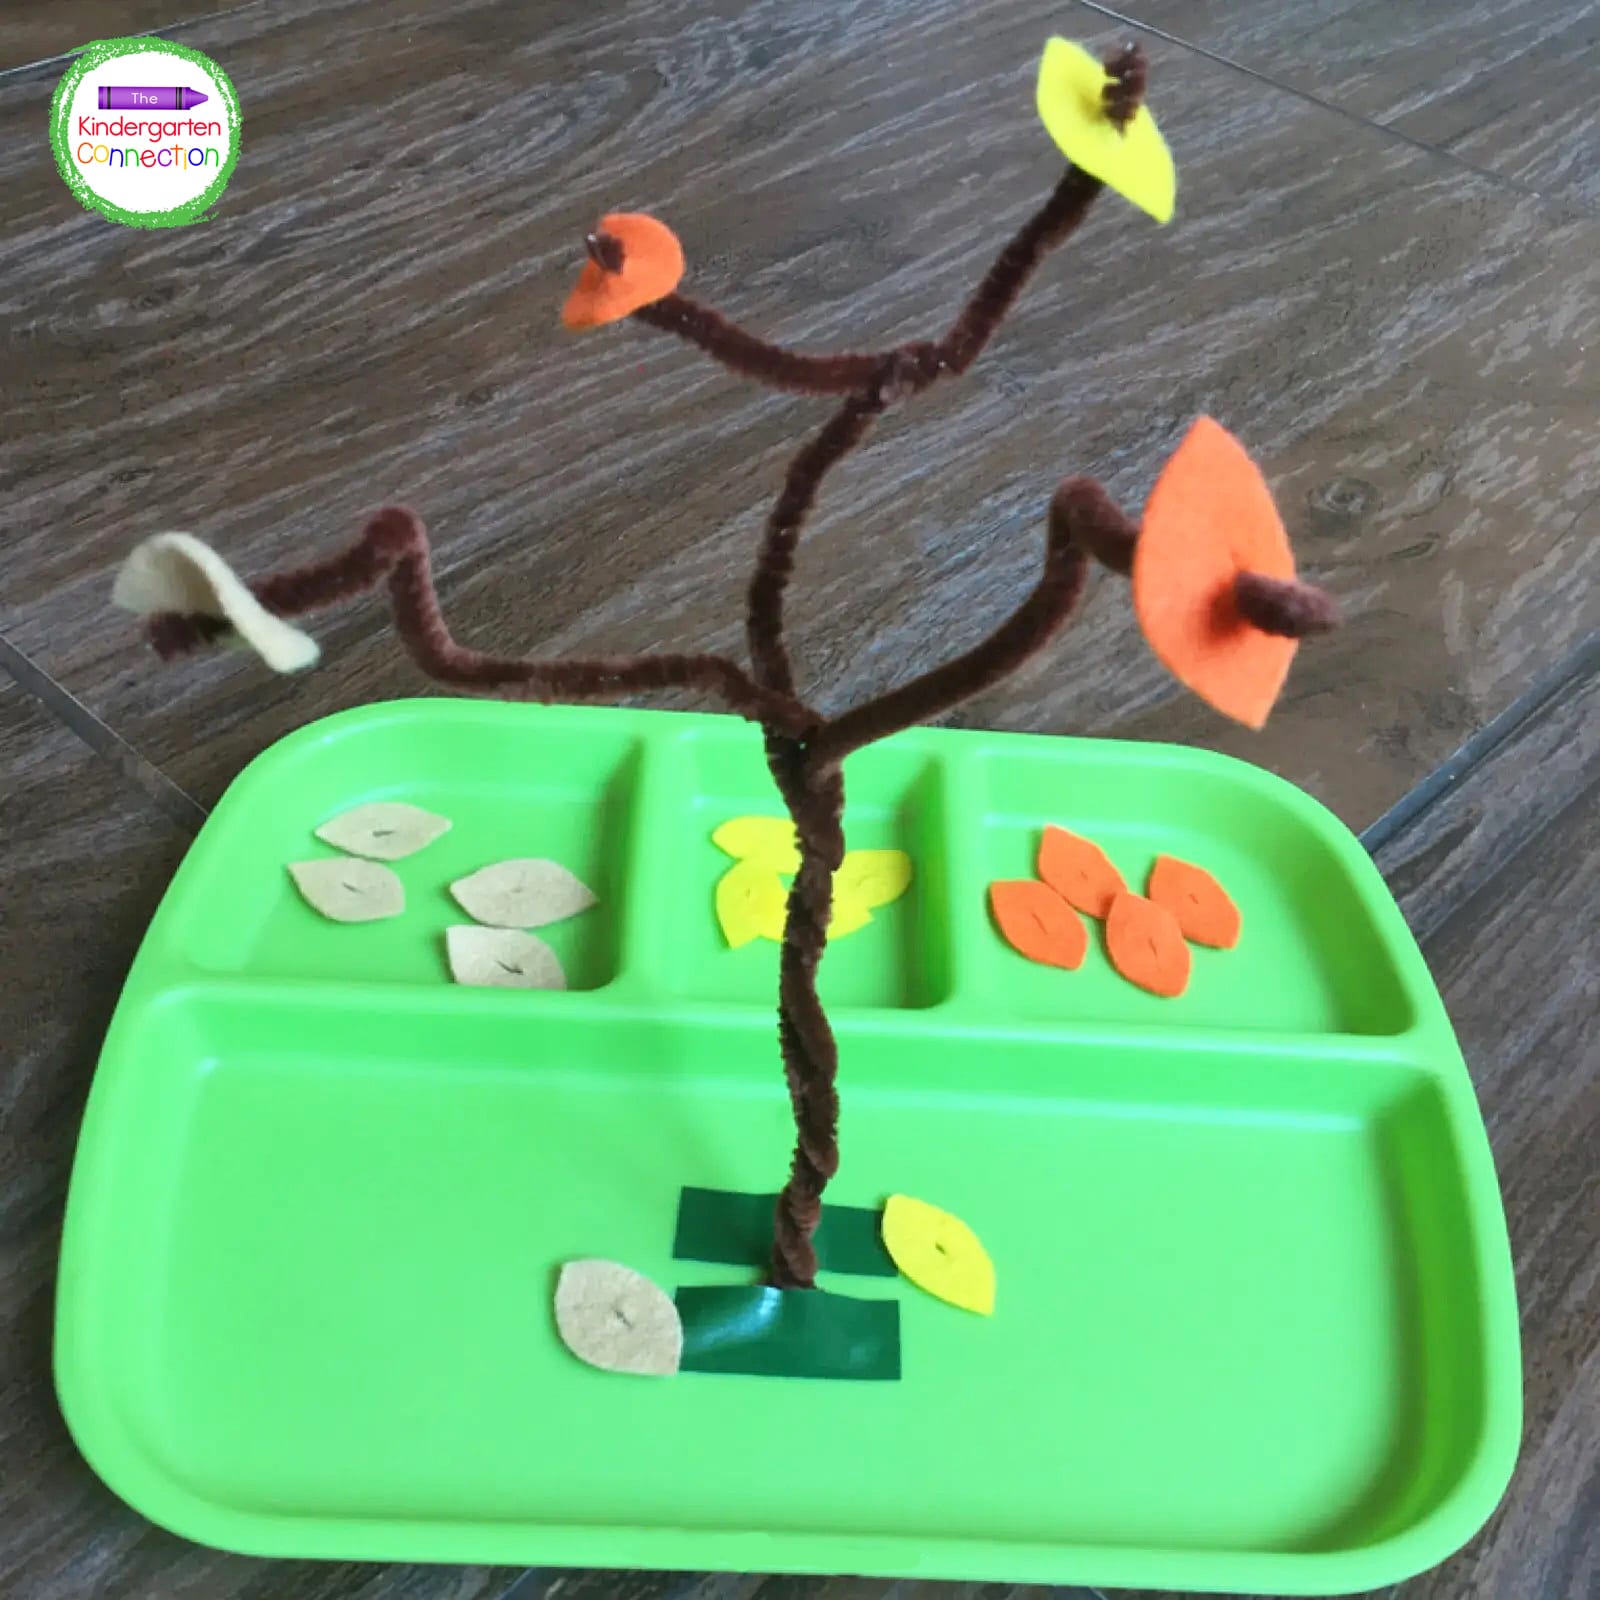 Kids can attach the leaves in a specific order or use this activity for free play.